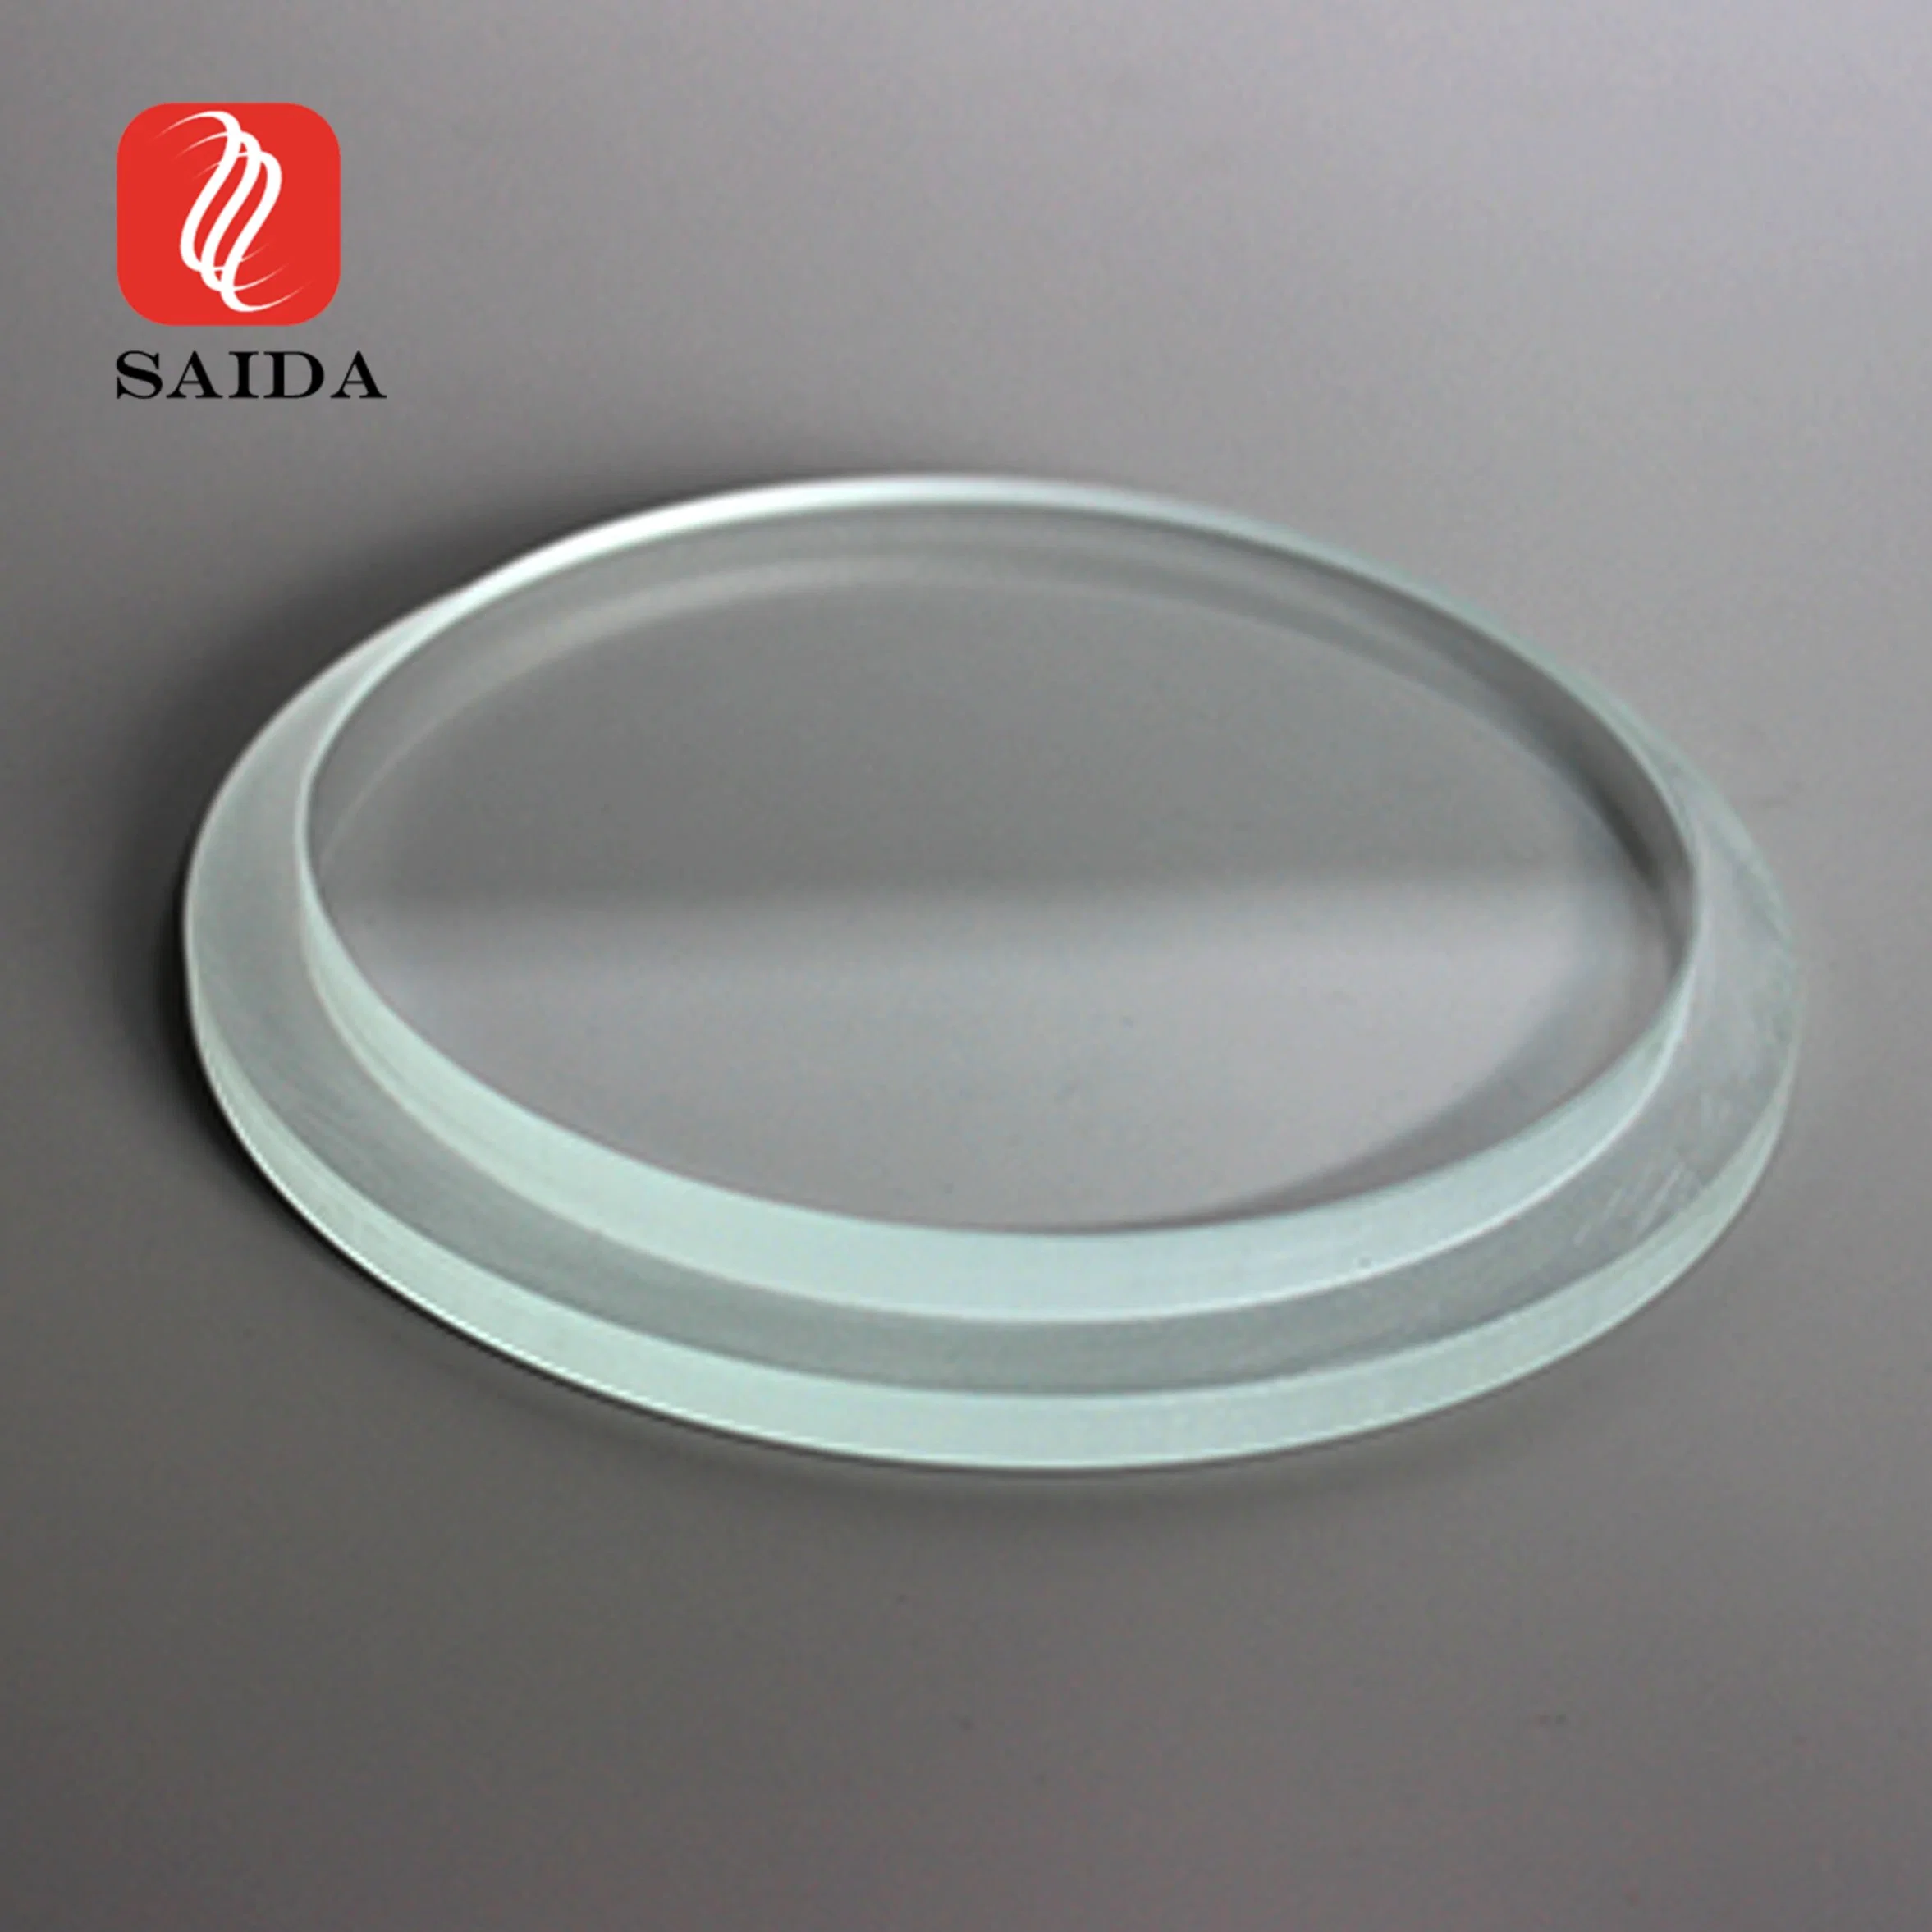 Saida Thickness 0.5mm, 0.7mm, 1.1mm, 2mm ITO Fto Coated Transparent Conductive Glass 1 Ohm-15 Ohm for Lab and Camera Glasses